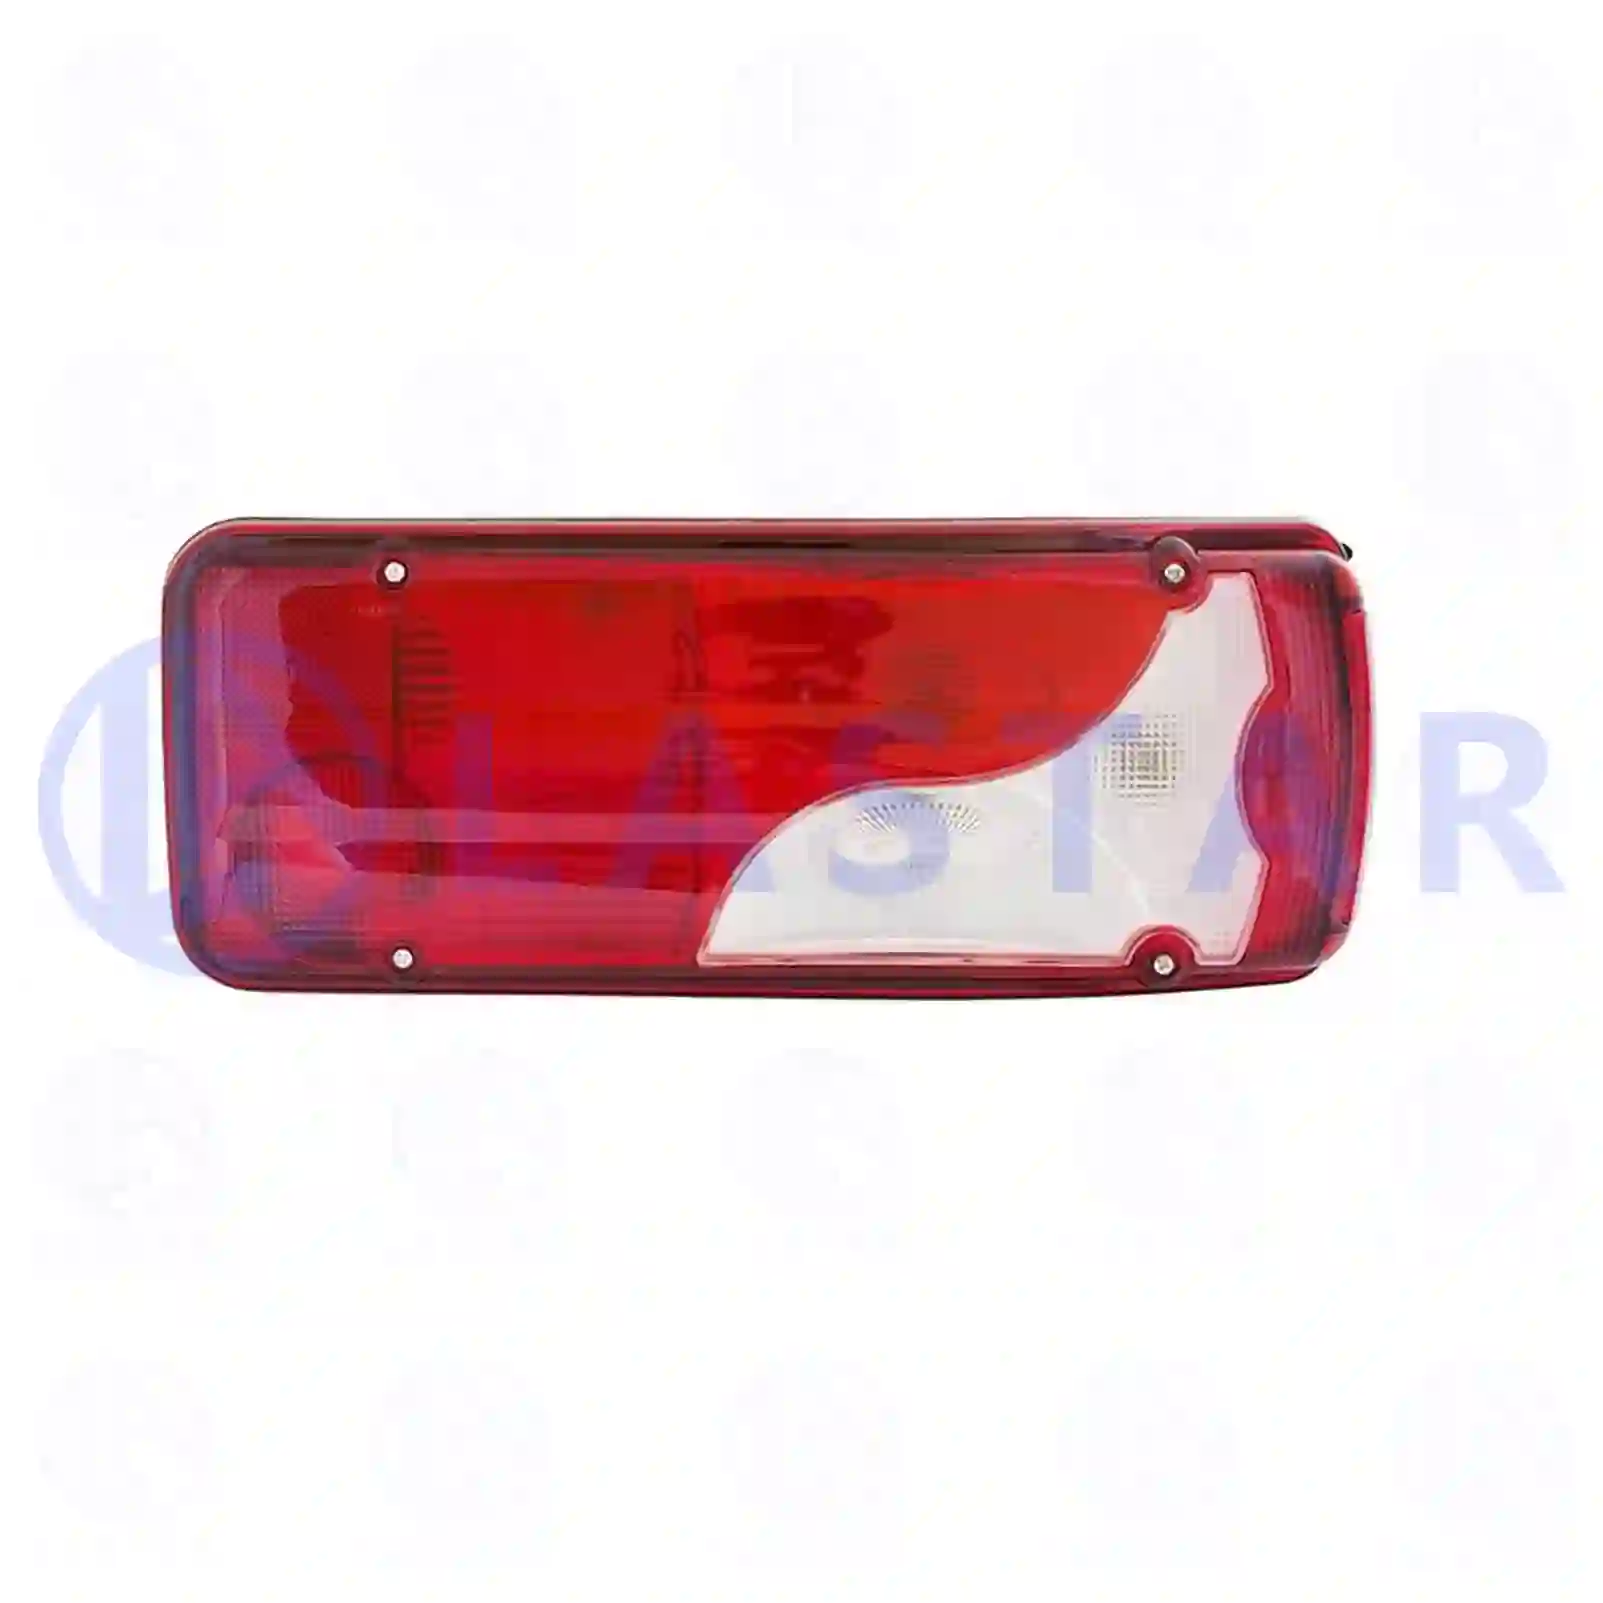 Tail lamp, right, 77712417, 1756751, 1906549, 2021575, 2129987, ZG21035-0008, , , ||  77712417 Lastar Spare Part | Truck Spare Parts, Auotomotive Spare Parts Tail lamp, right, 77712417, 1756751, 1906549, 2021575, 2129987, ZG21035-0008, , , ||  77712417 Lastar Spare Part | Truck Spare Parts, Auotomotive Spare Parts